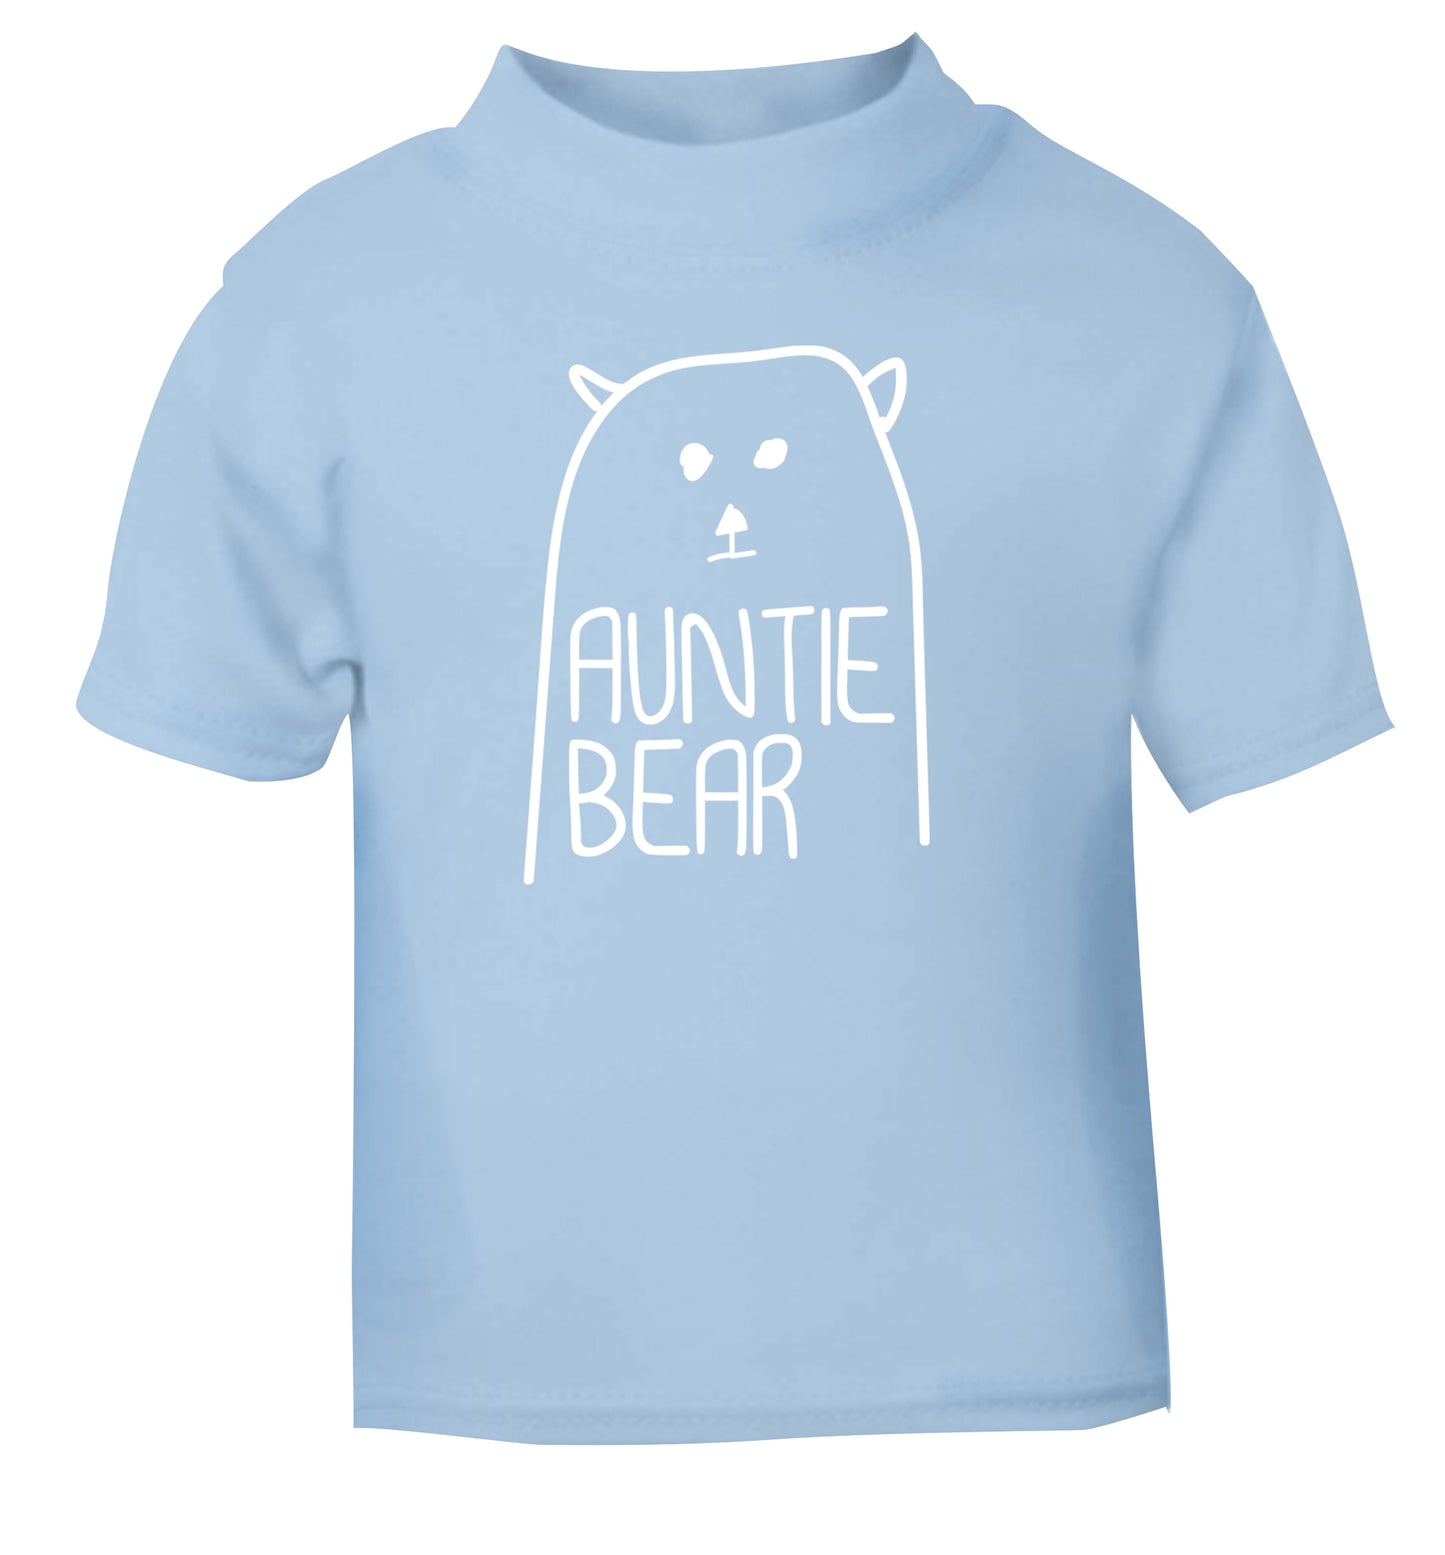 Auntie bear light blue Baby Toddler Tshirt 2 Years